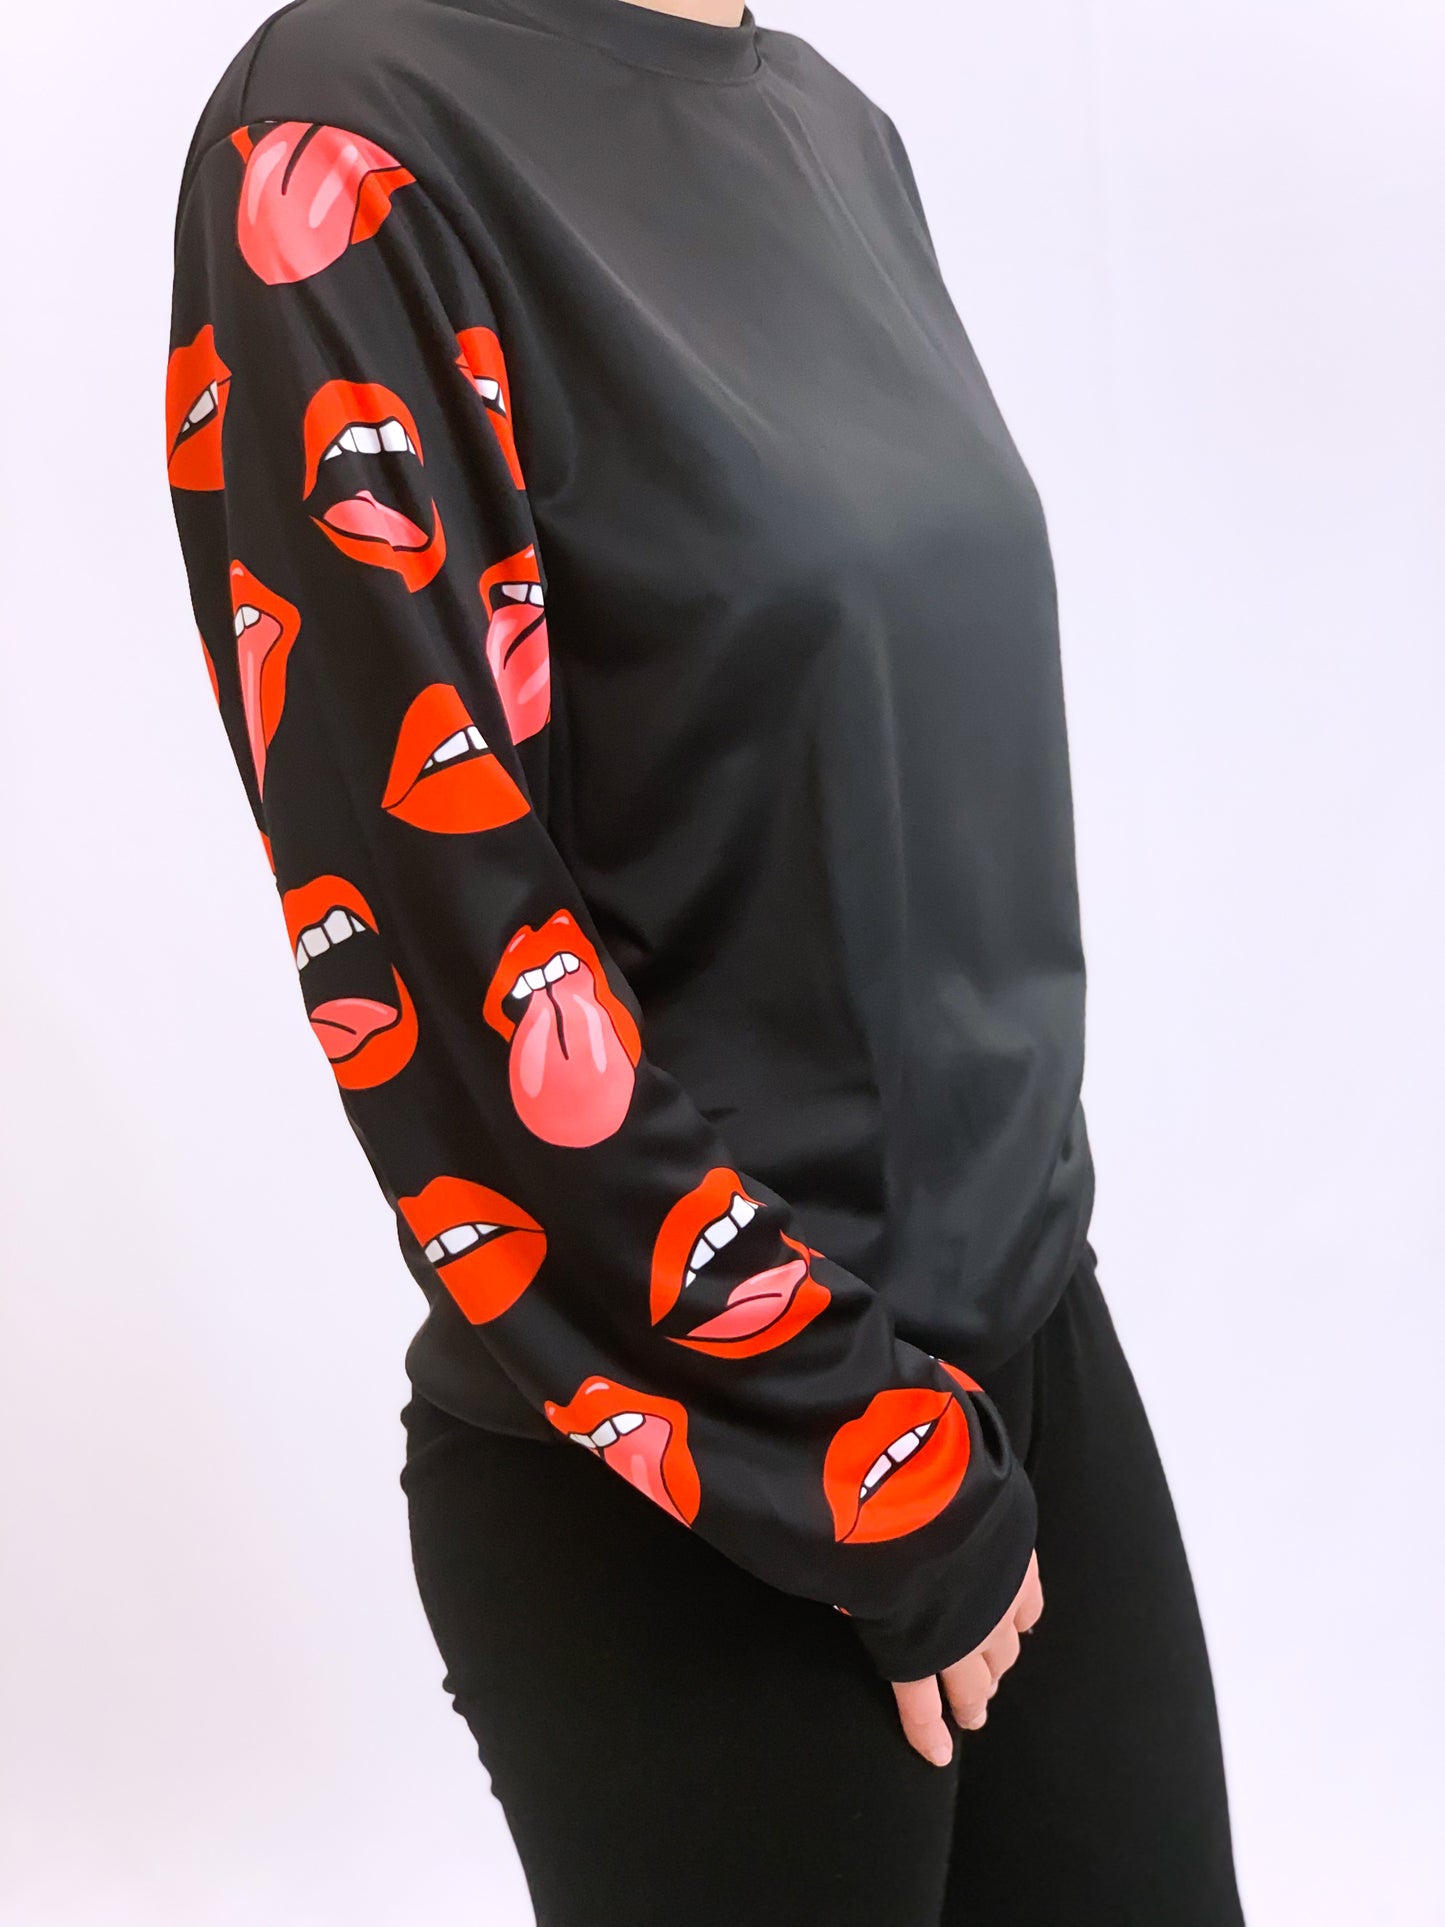 Tongues Out Sleeves Crew Neck Sweatshirt